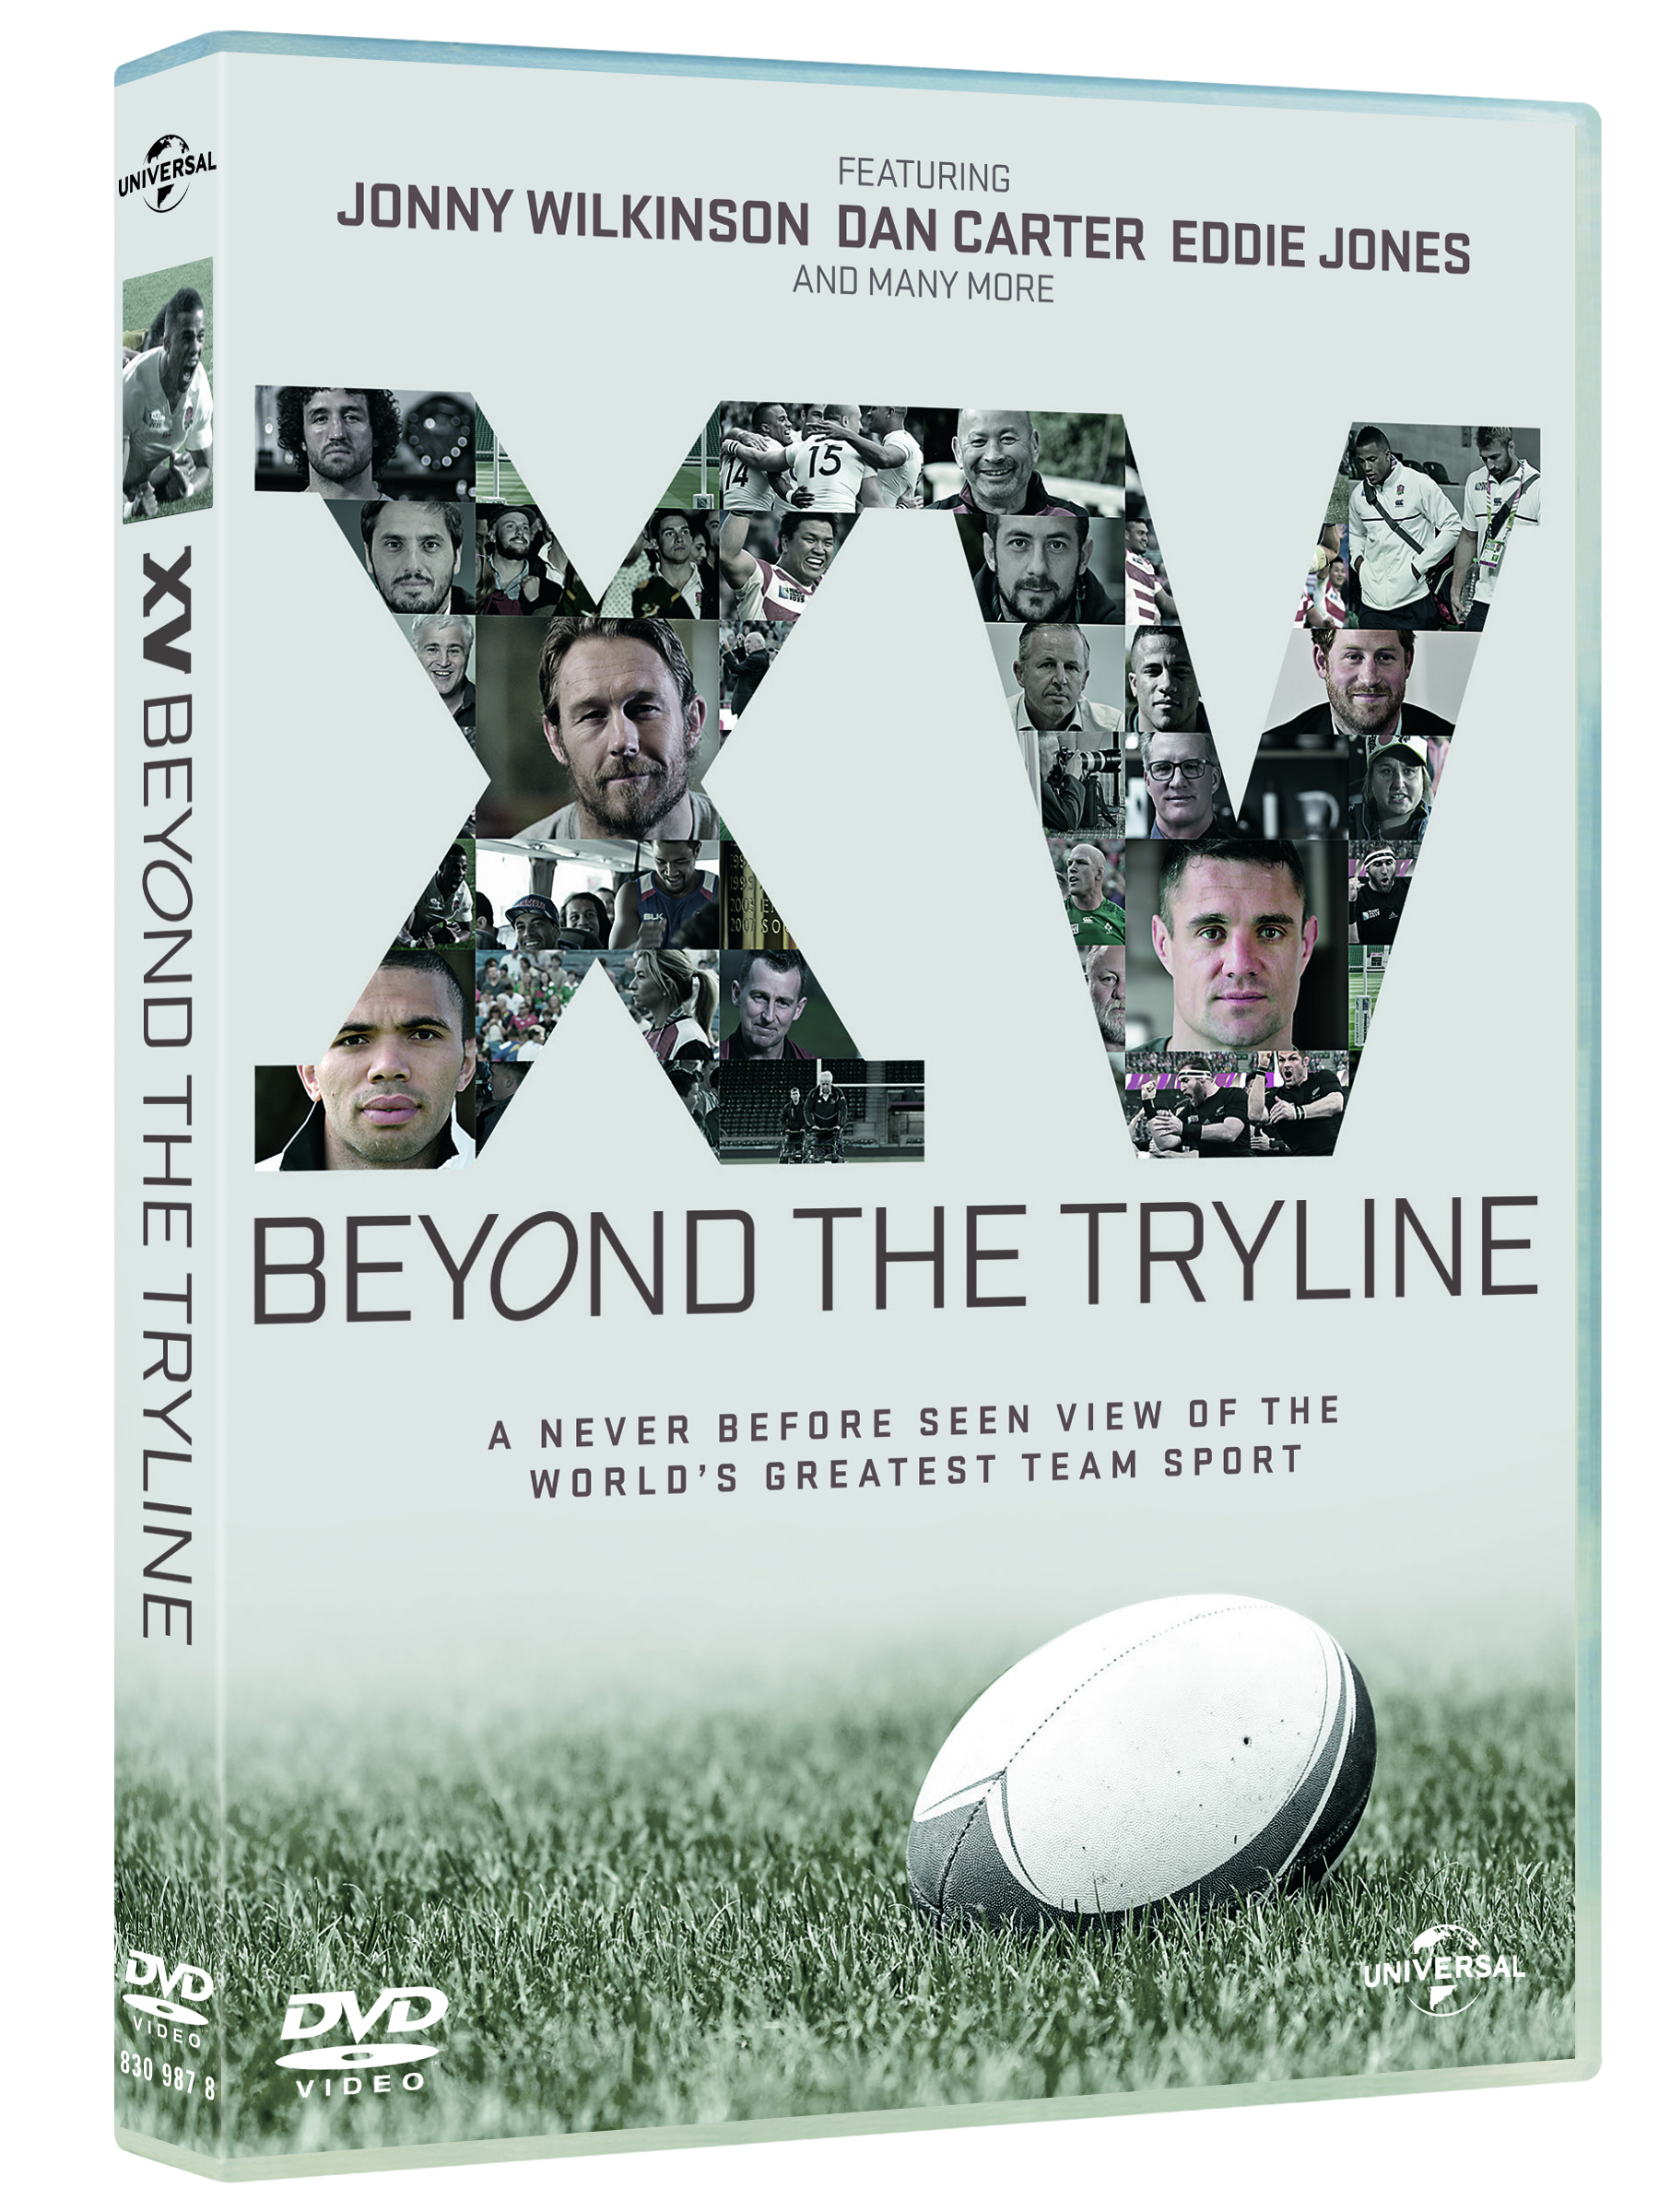 8309878-11-beyond-the-tryline-uk-dvd-retail-sleeve_3pa